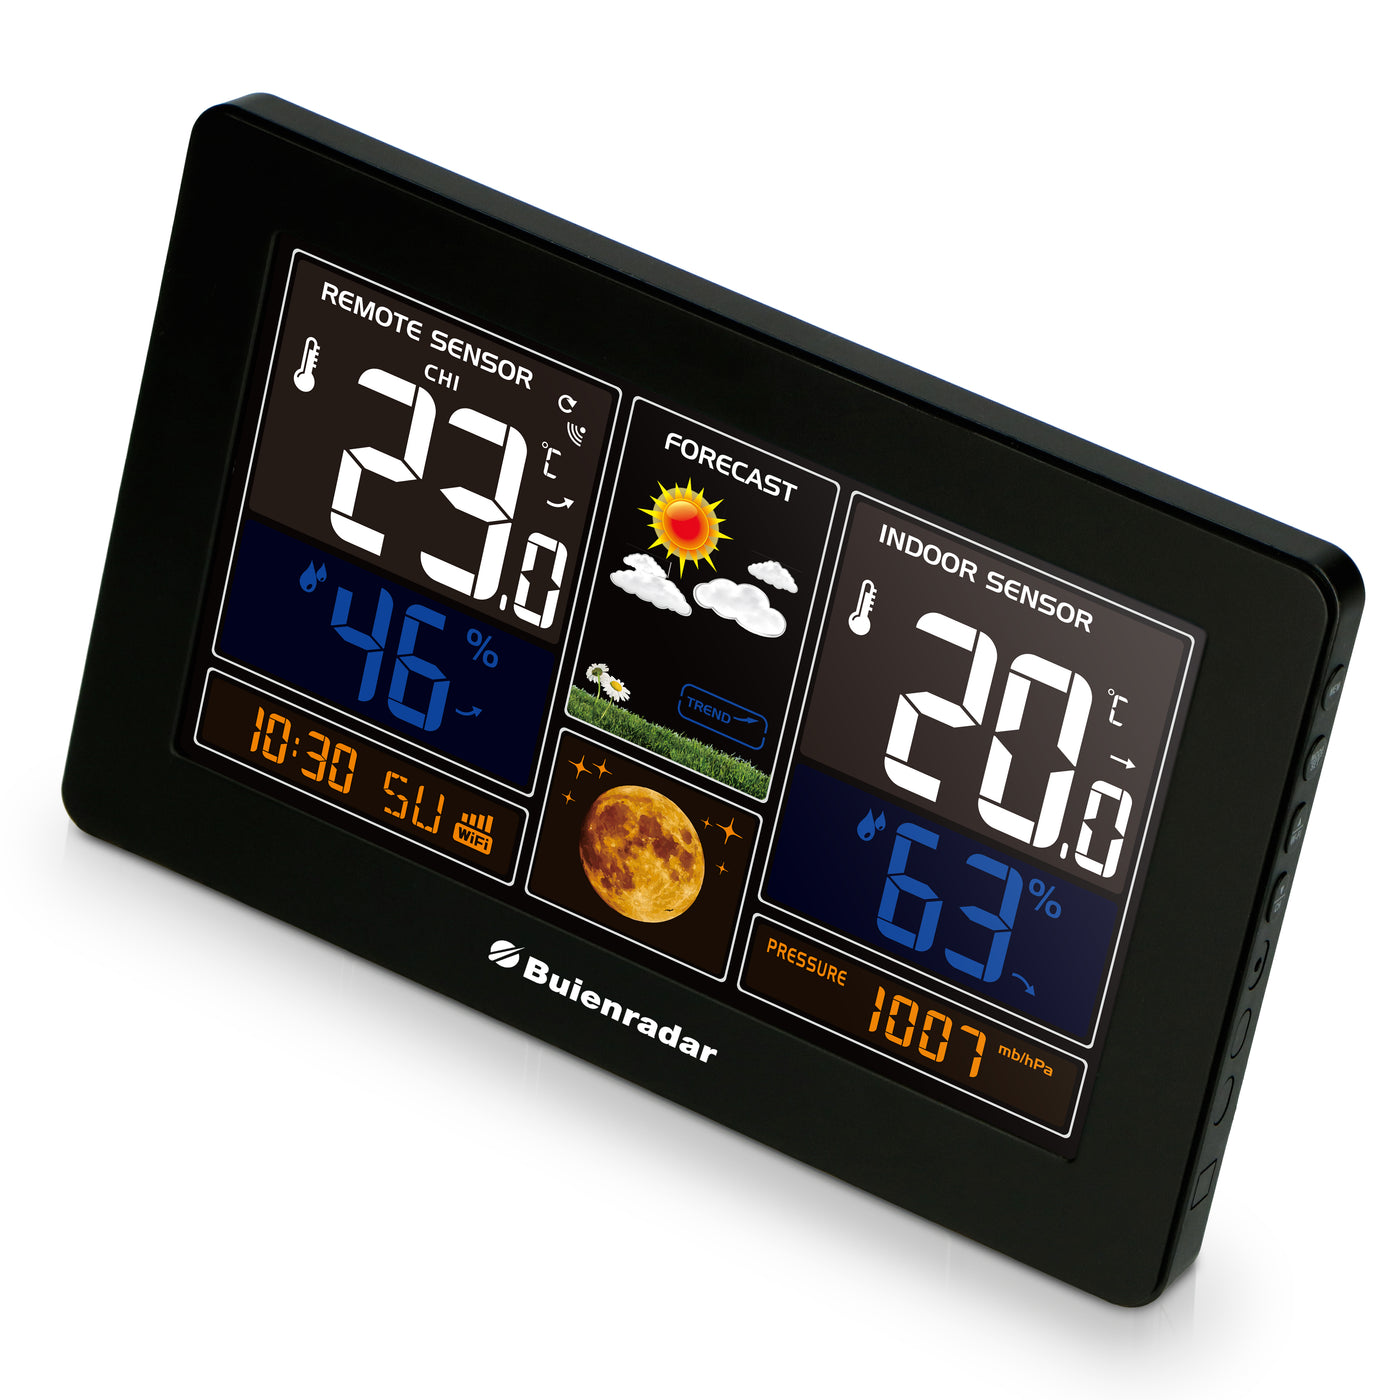 Buienradar BR900 - 3 in 1 Wi-Fi weather station with app and wireless outdoor sensor, black